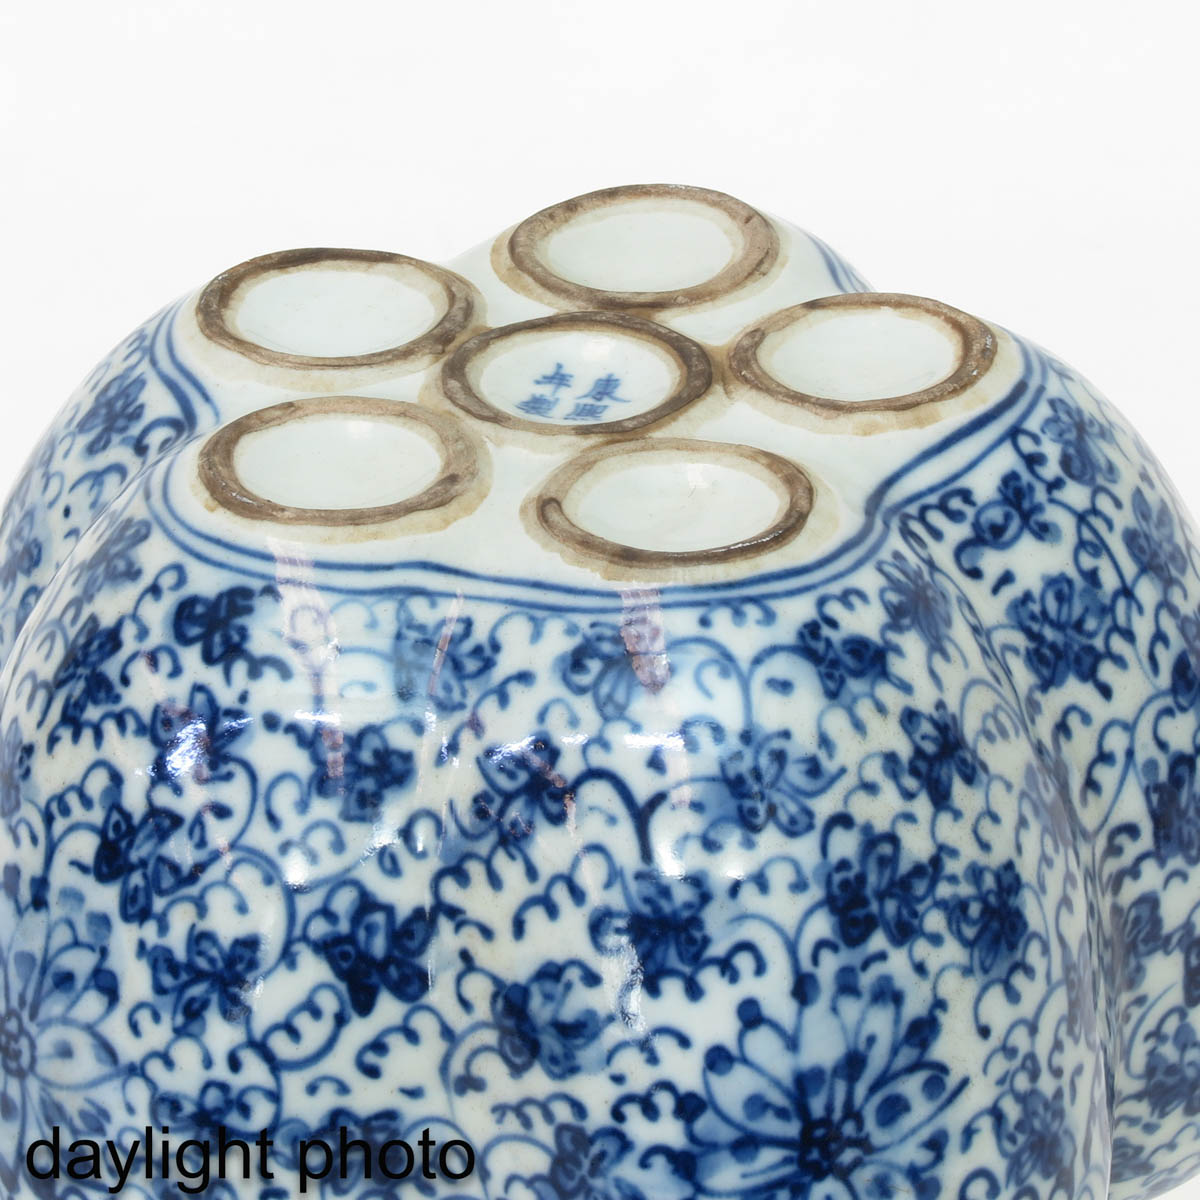 A Blue and White Tulip Vase - Image 8 of 10